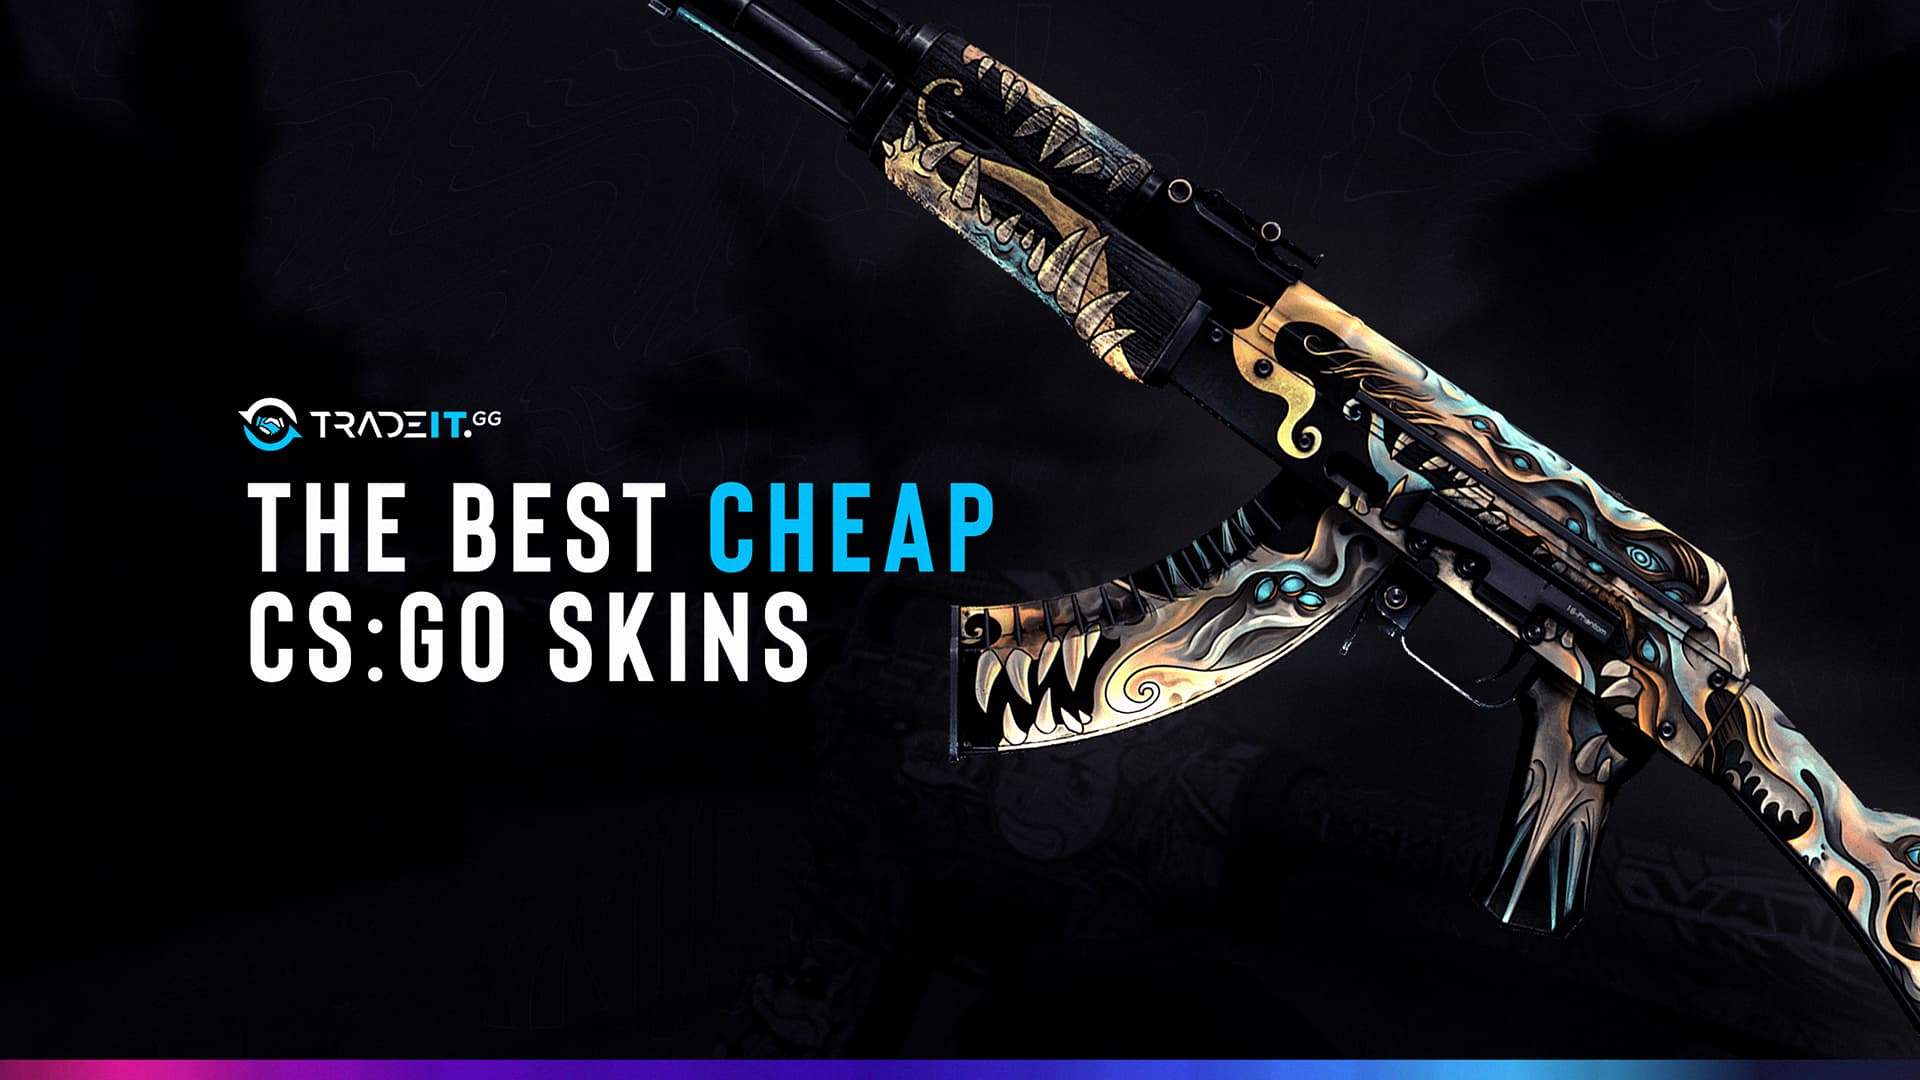 Intens deltager Irreplaceable The Best Cheap CSGO Skins You Need to Buy